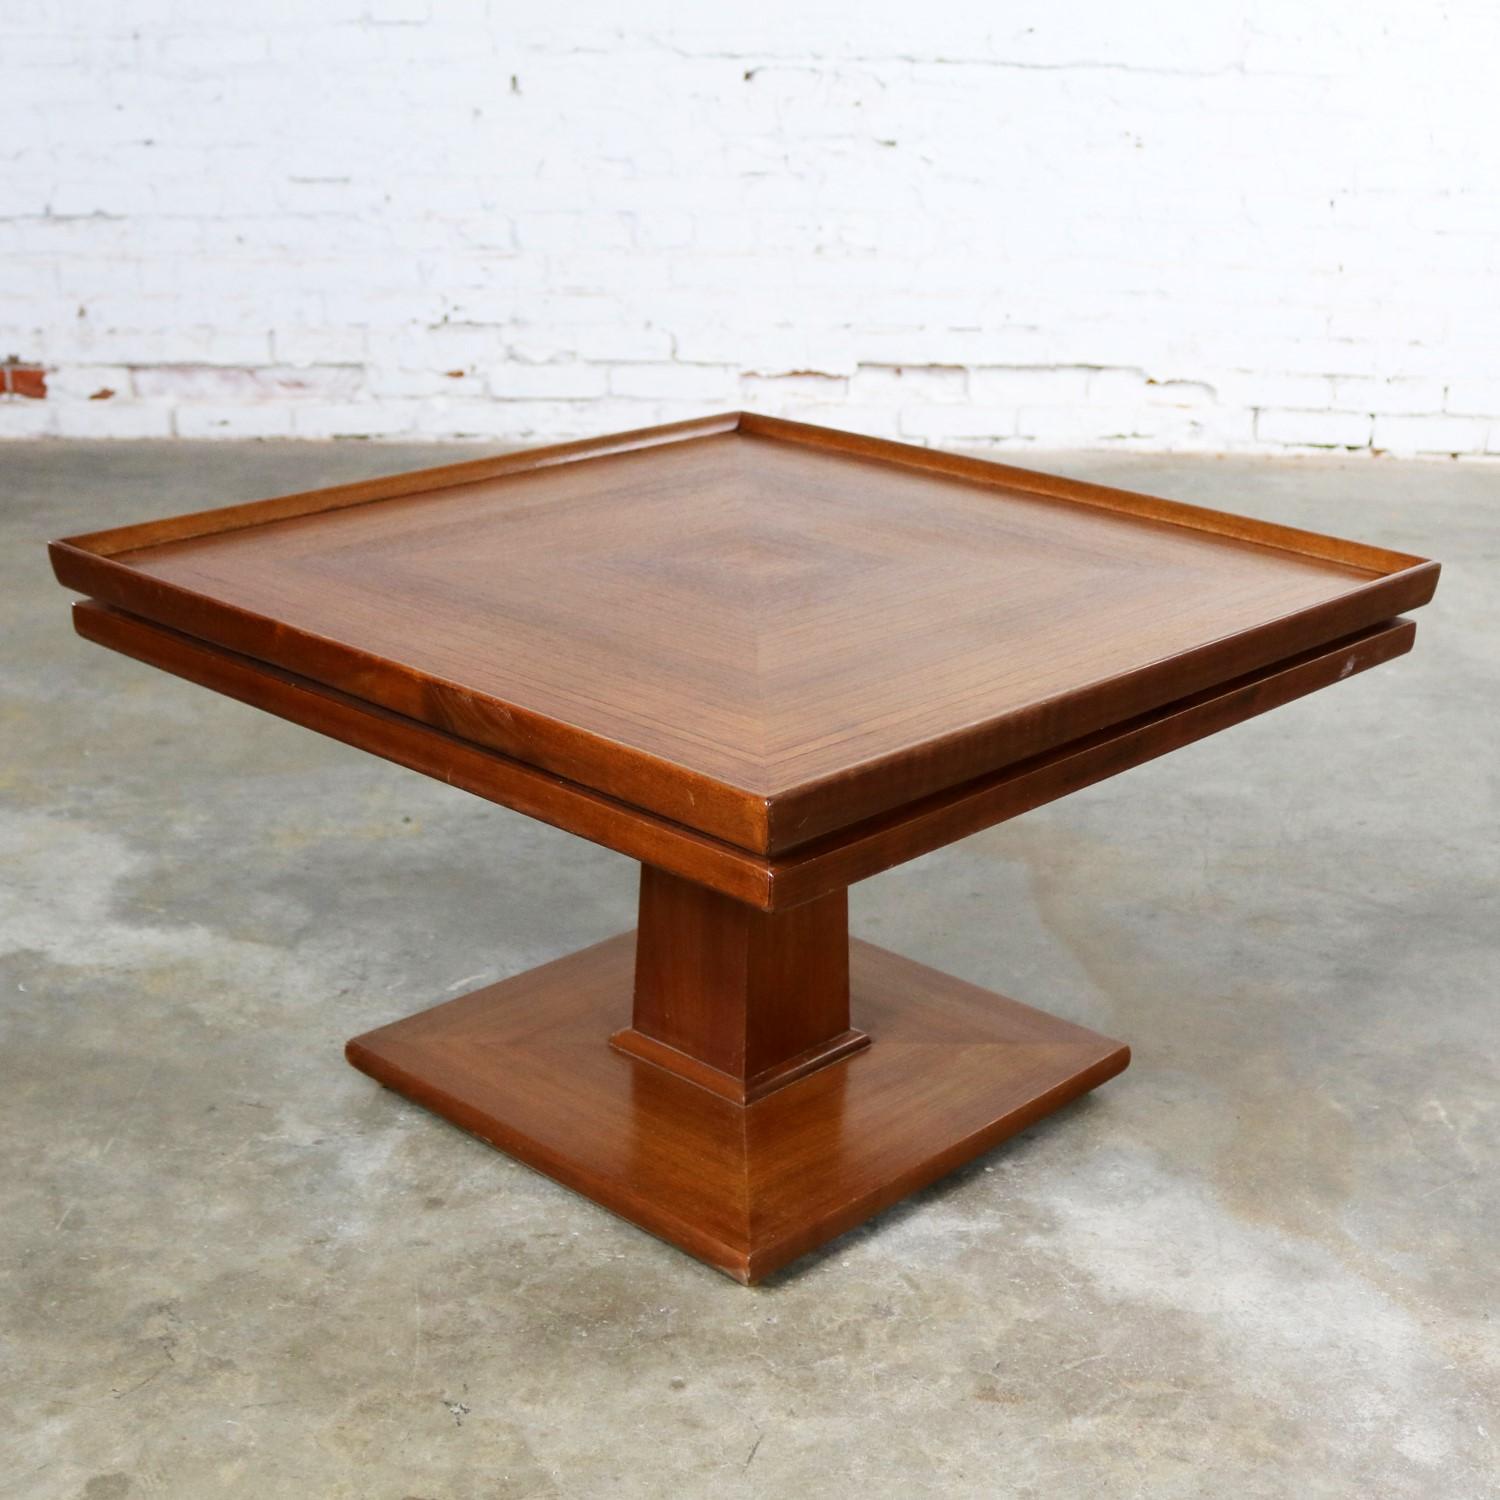 Handsome square midcentury walnut pedestal side table, end table, or lamp table by Erwin Lambeth. This table is in fabulous vintage condition. It does have some minor nicks as you would expect with age, but they do not detract from the beauty of